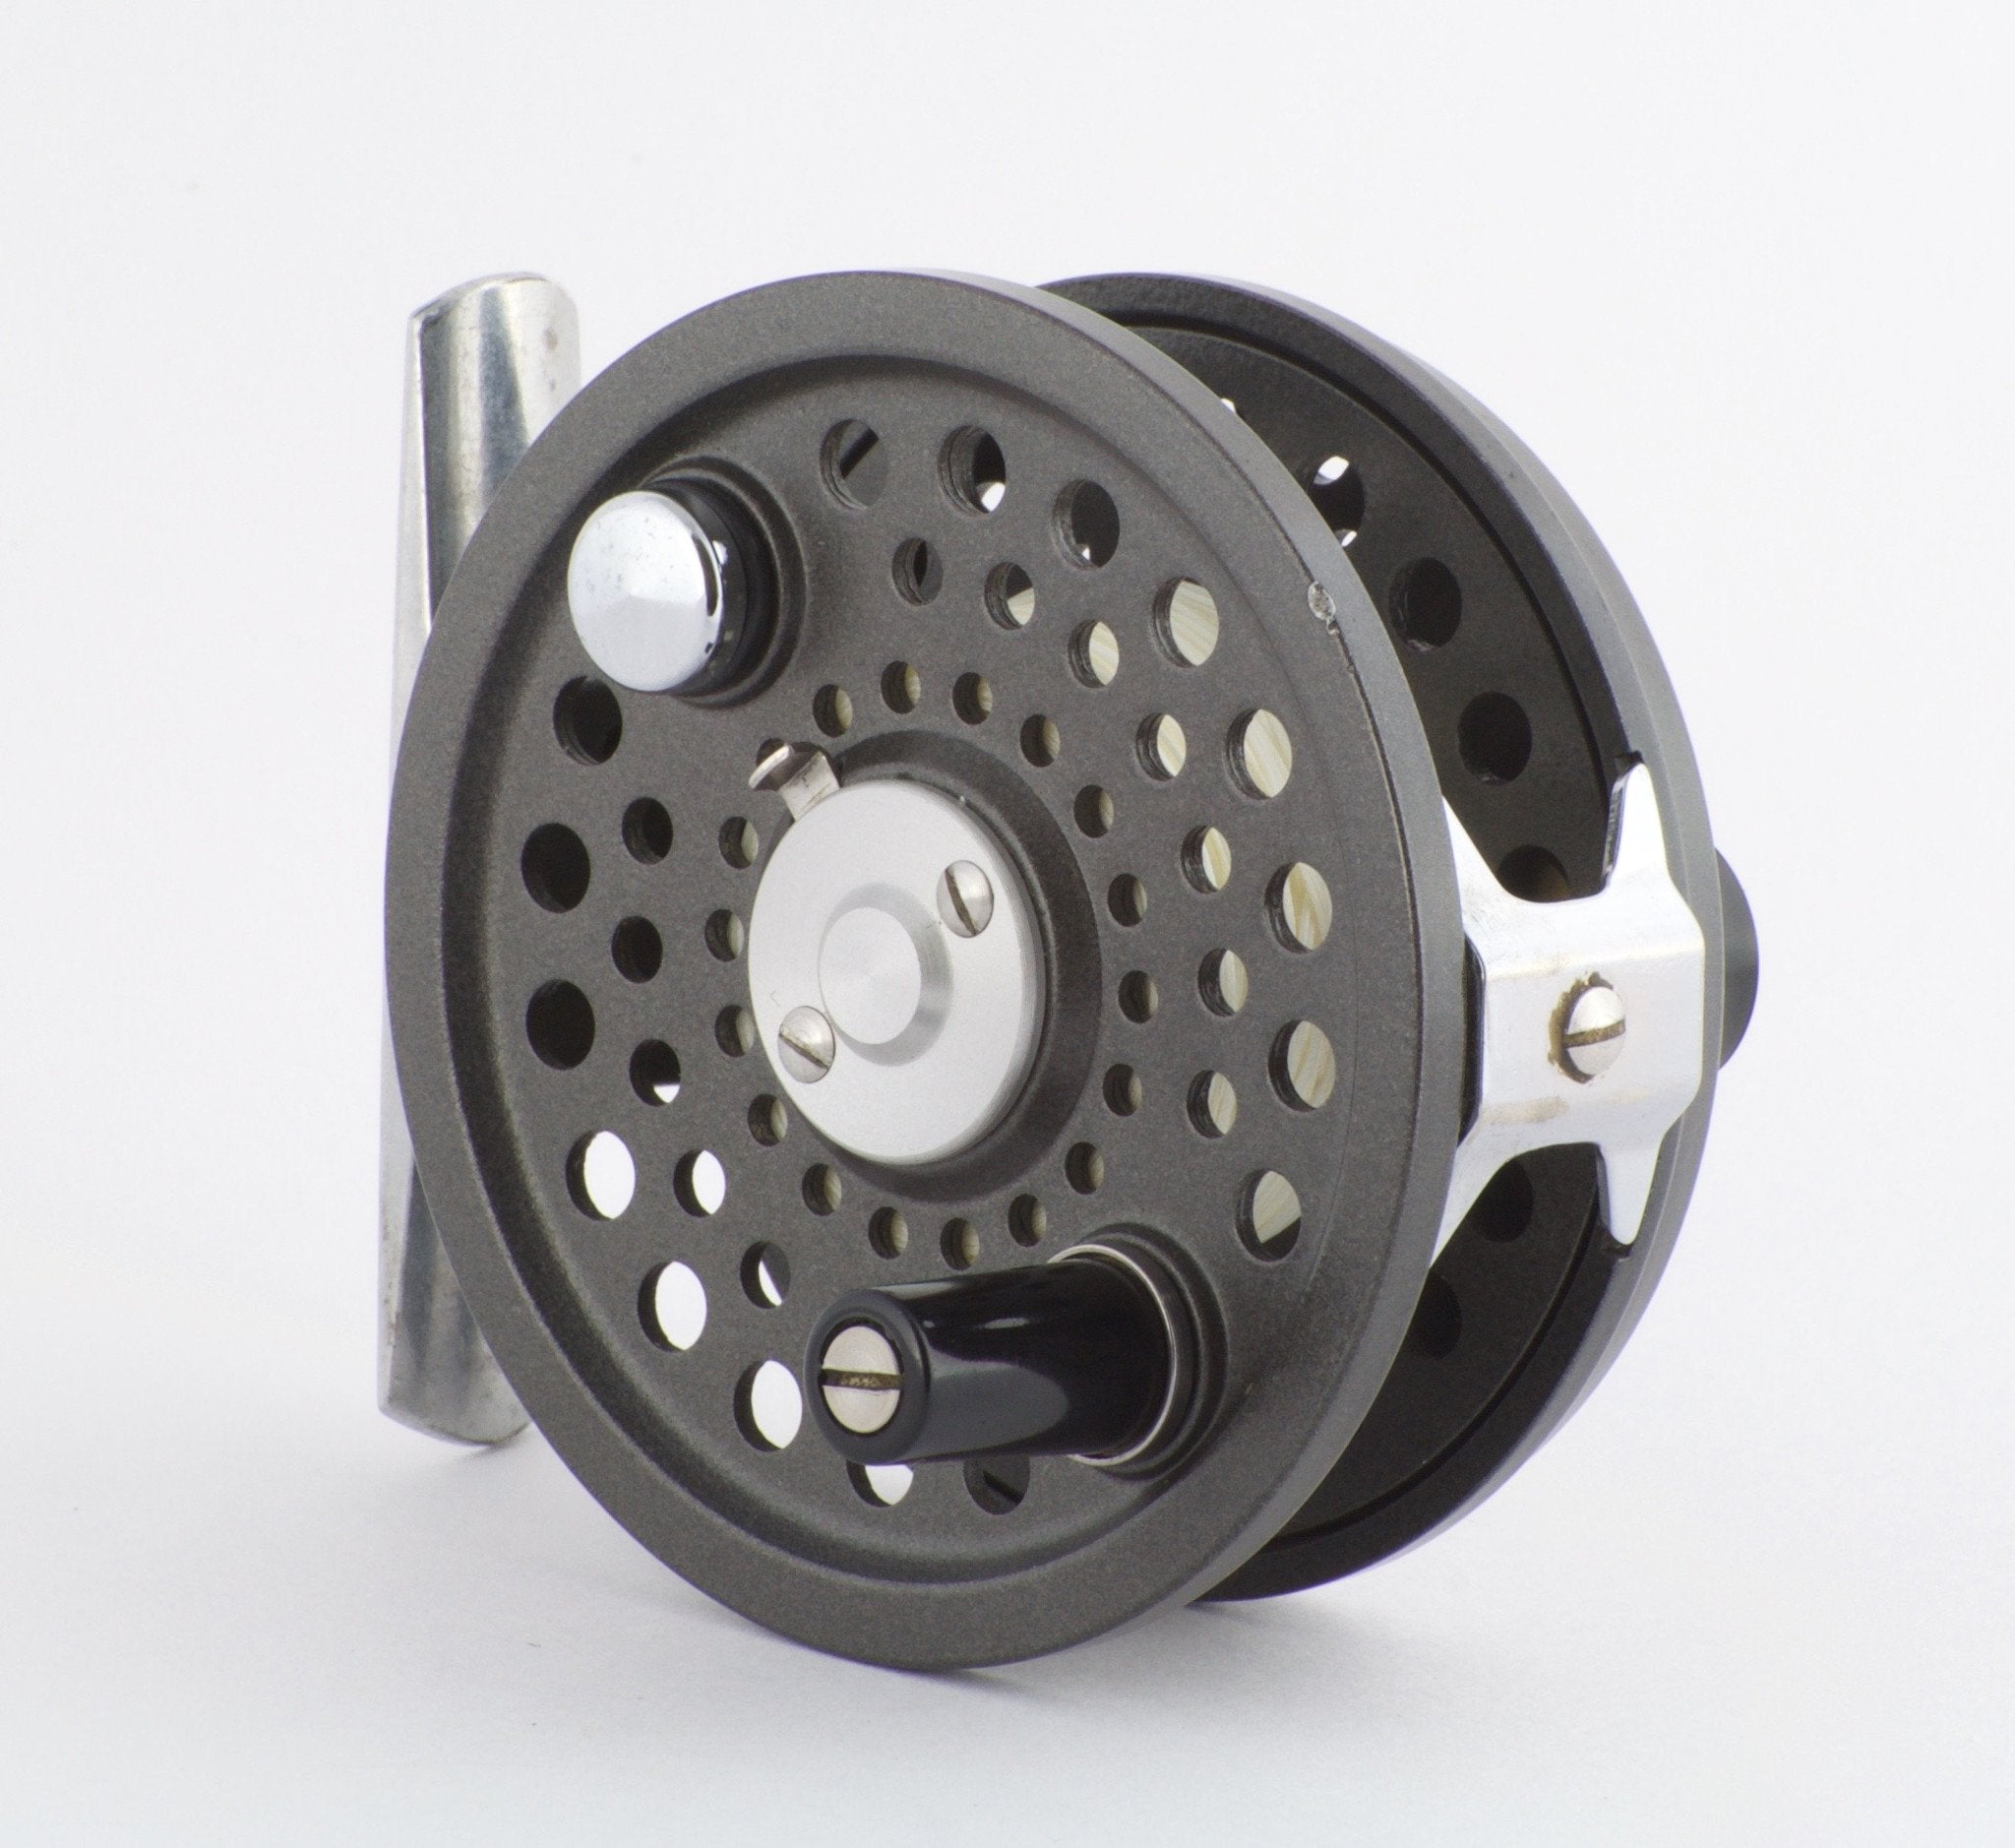 Gold Orvis Battenkill Large-Arbor III Fly Fishing Reel. Made in England. 海外  即決 - スキル、知識